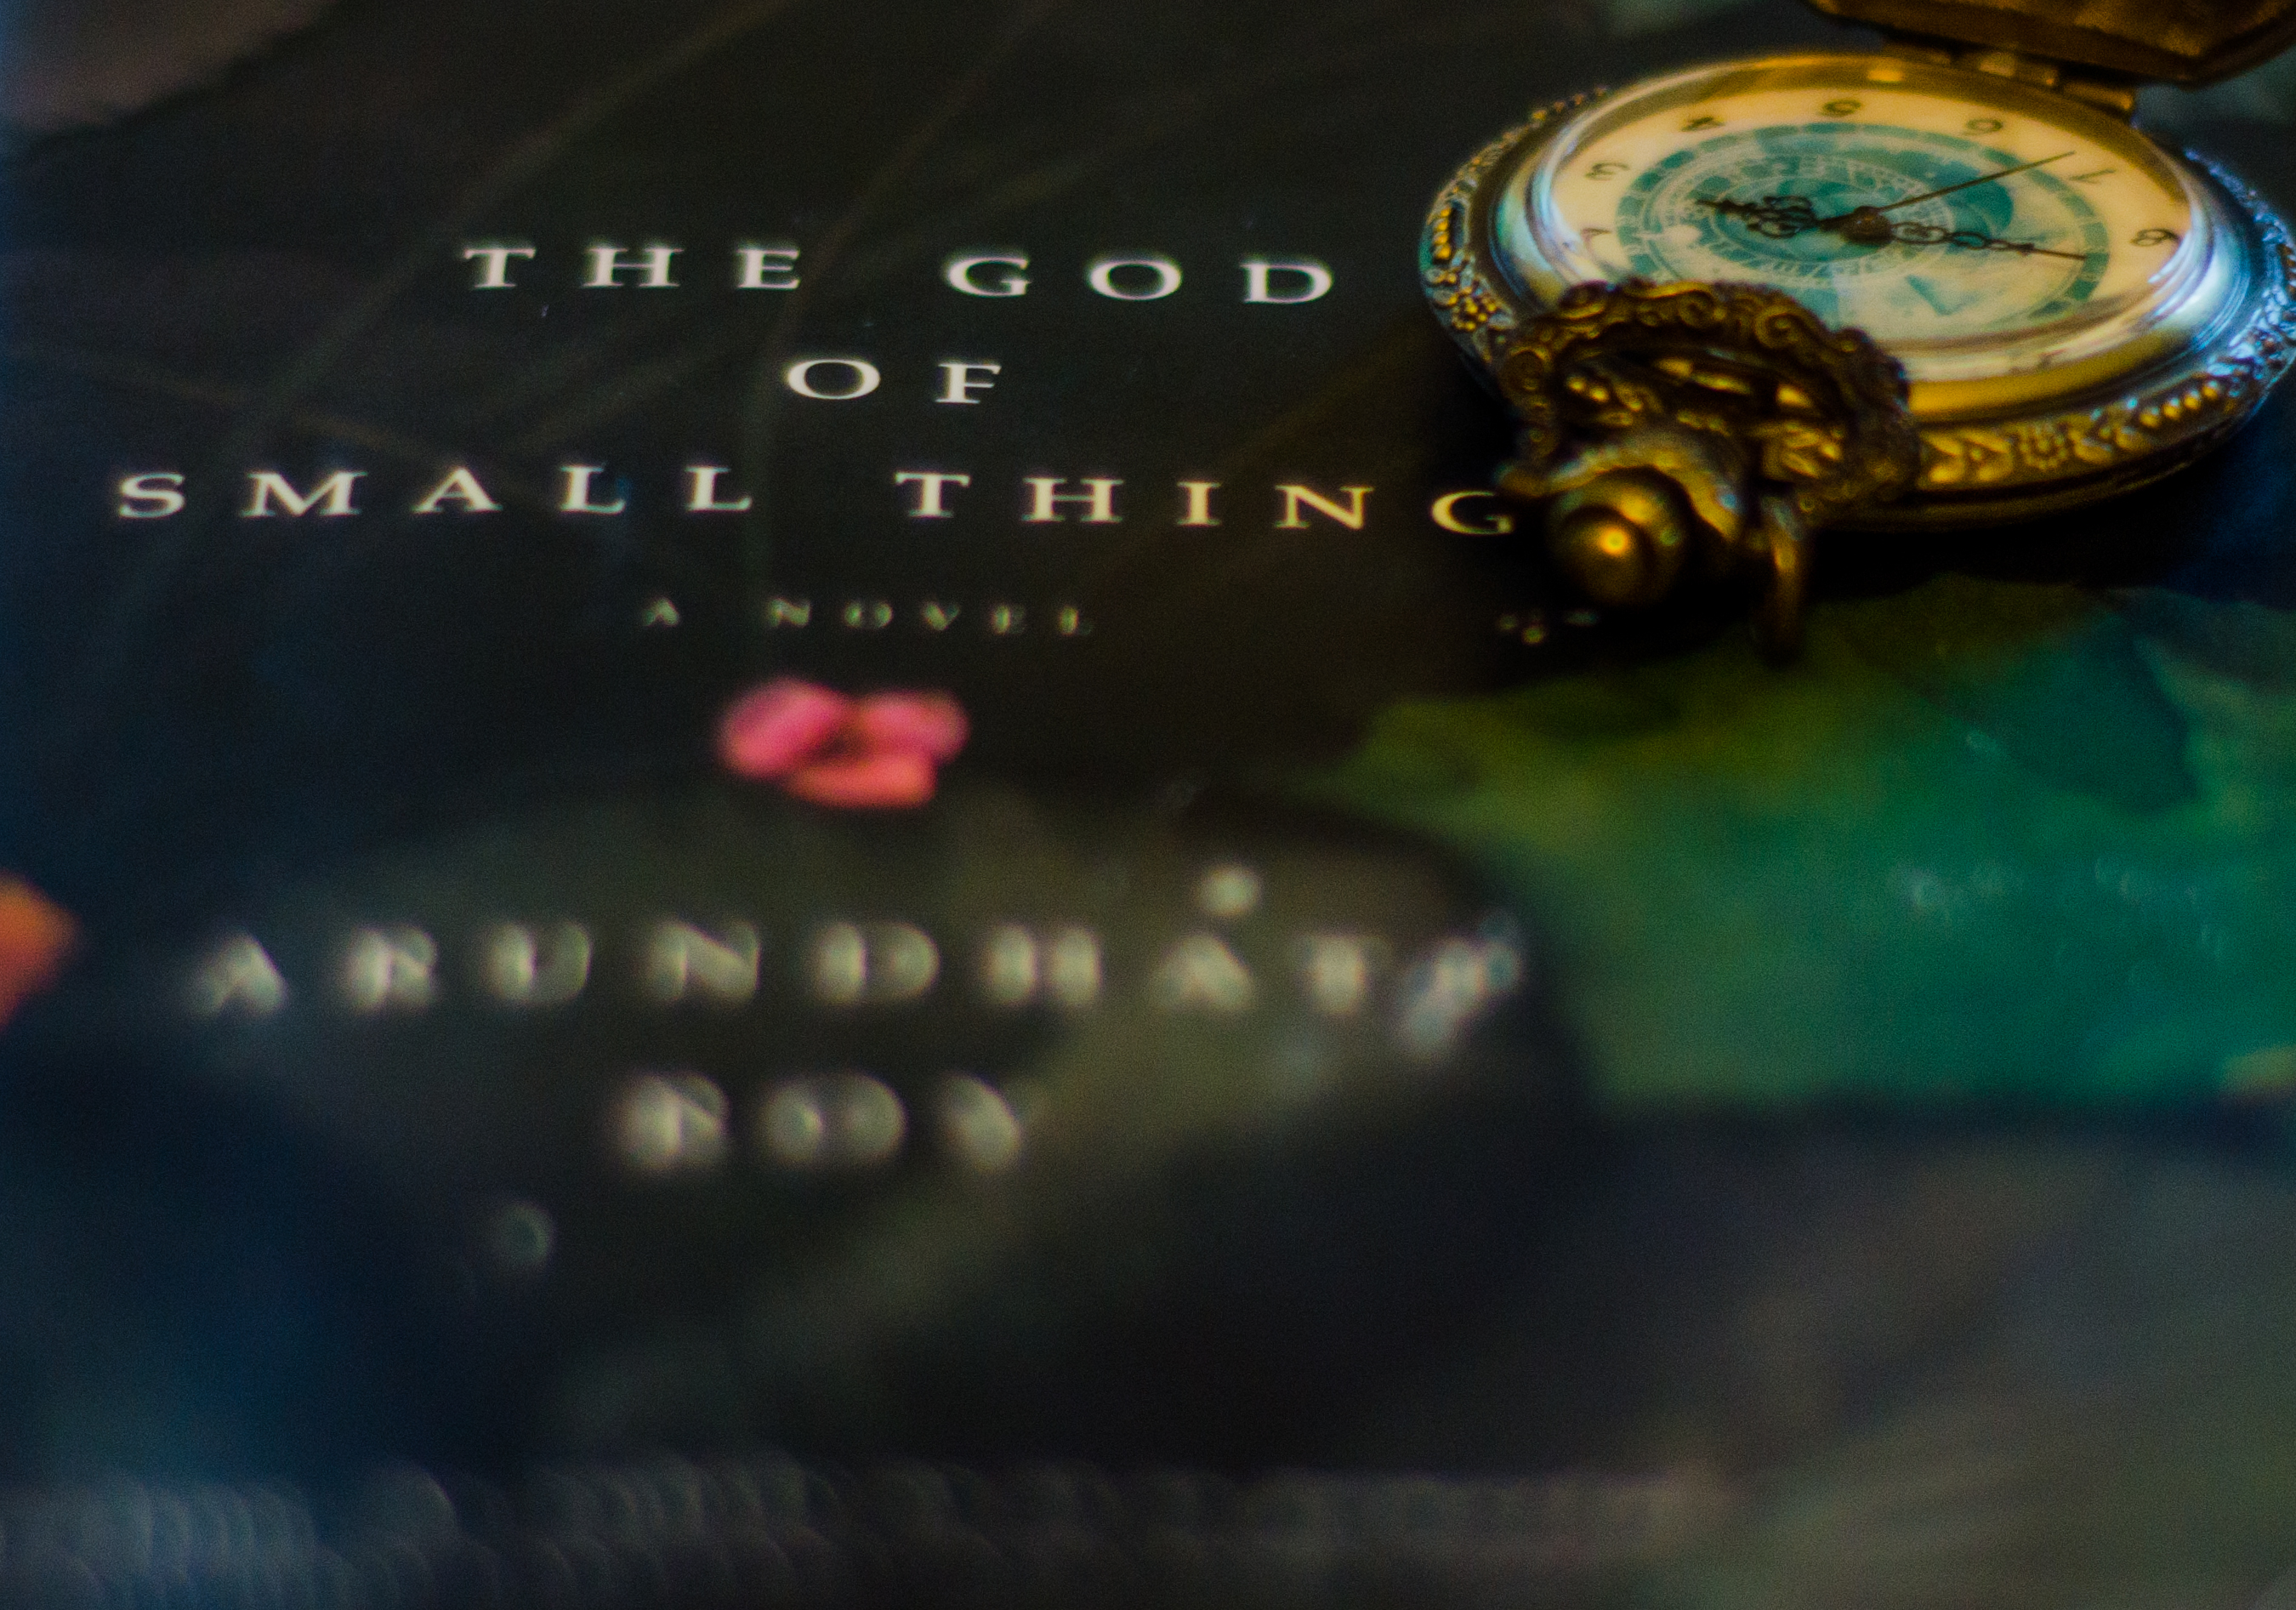 Essay the god of small things